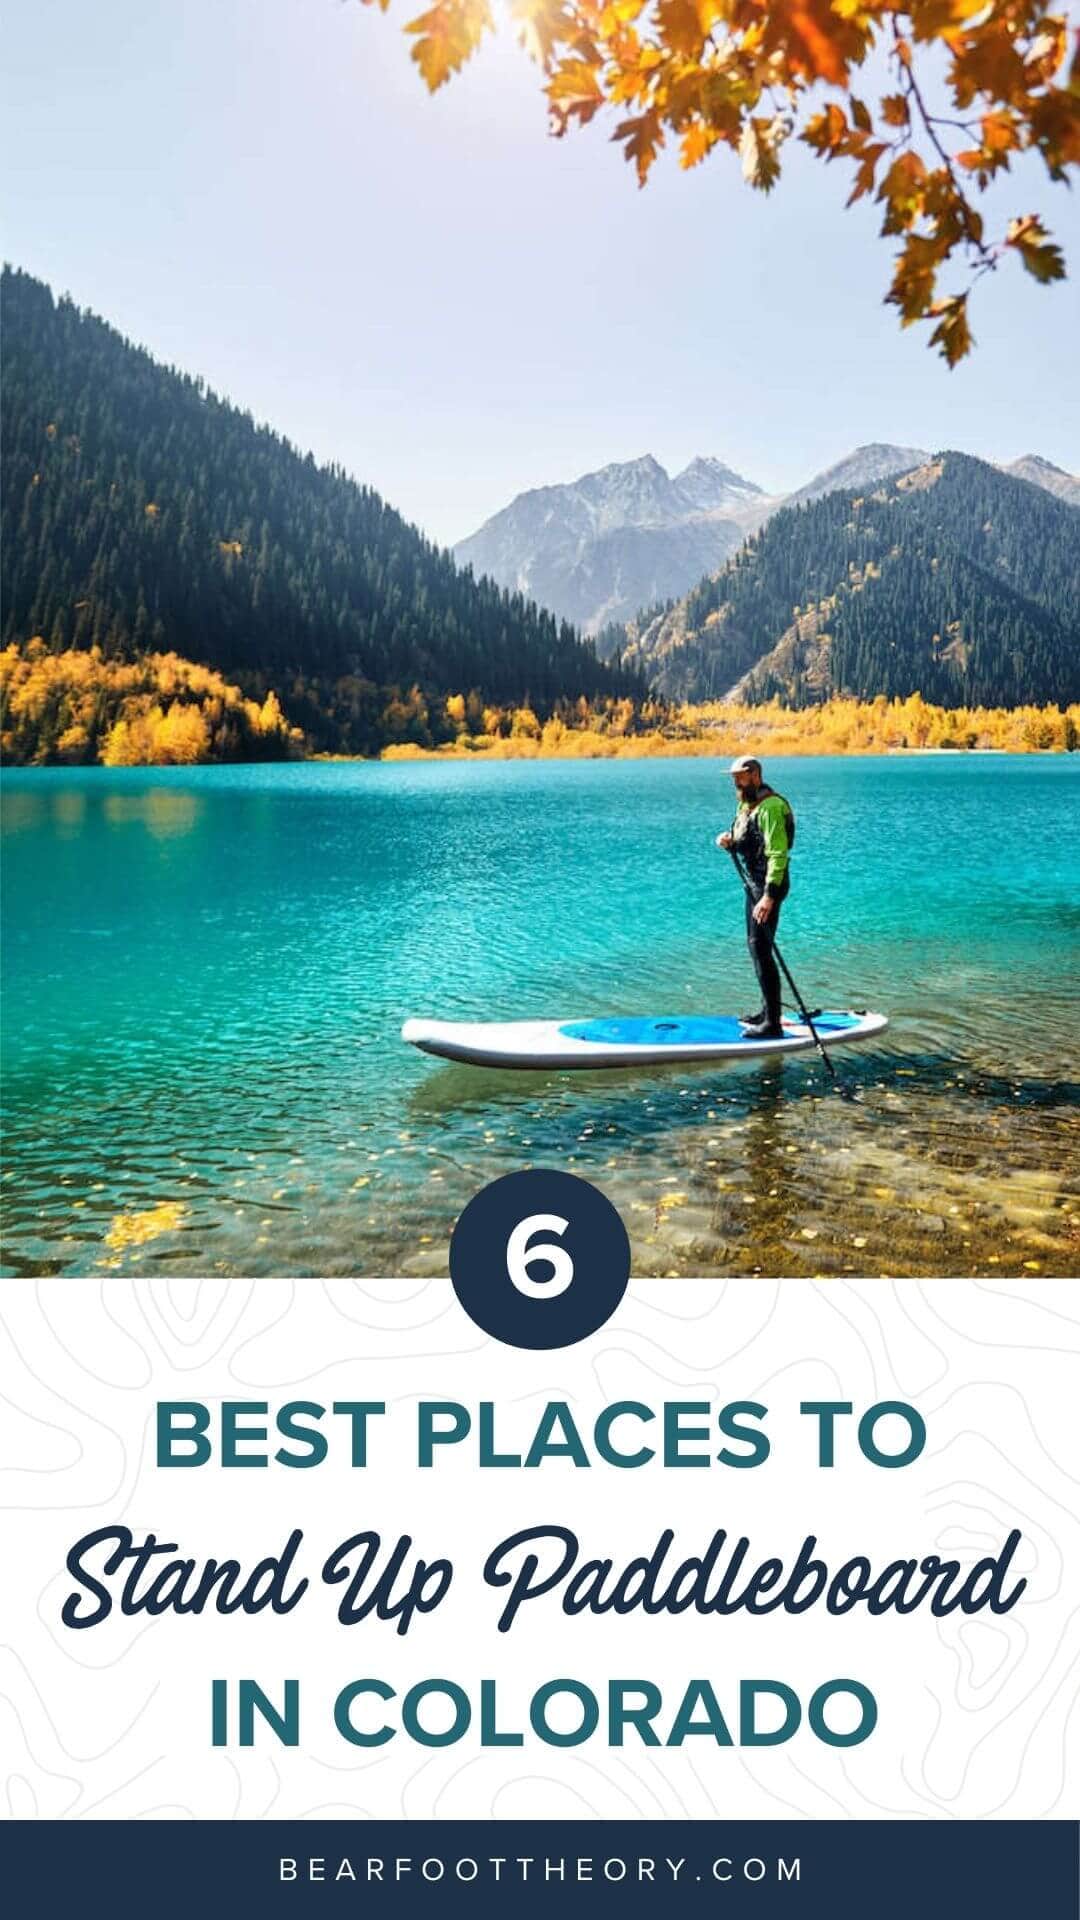 Discover the best places to SUP in Colorado with the best Rocky Mountain views and calm waters perfect for stand up paddling.